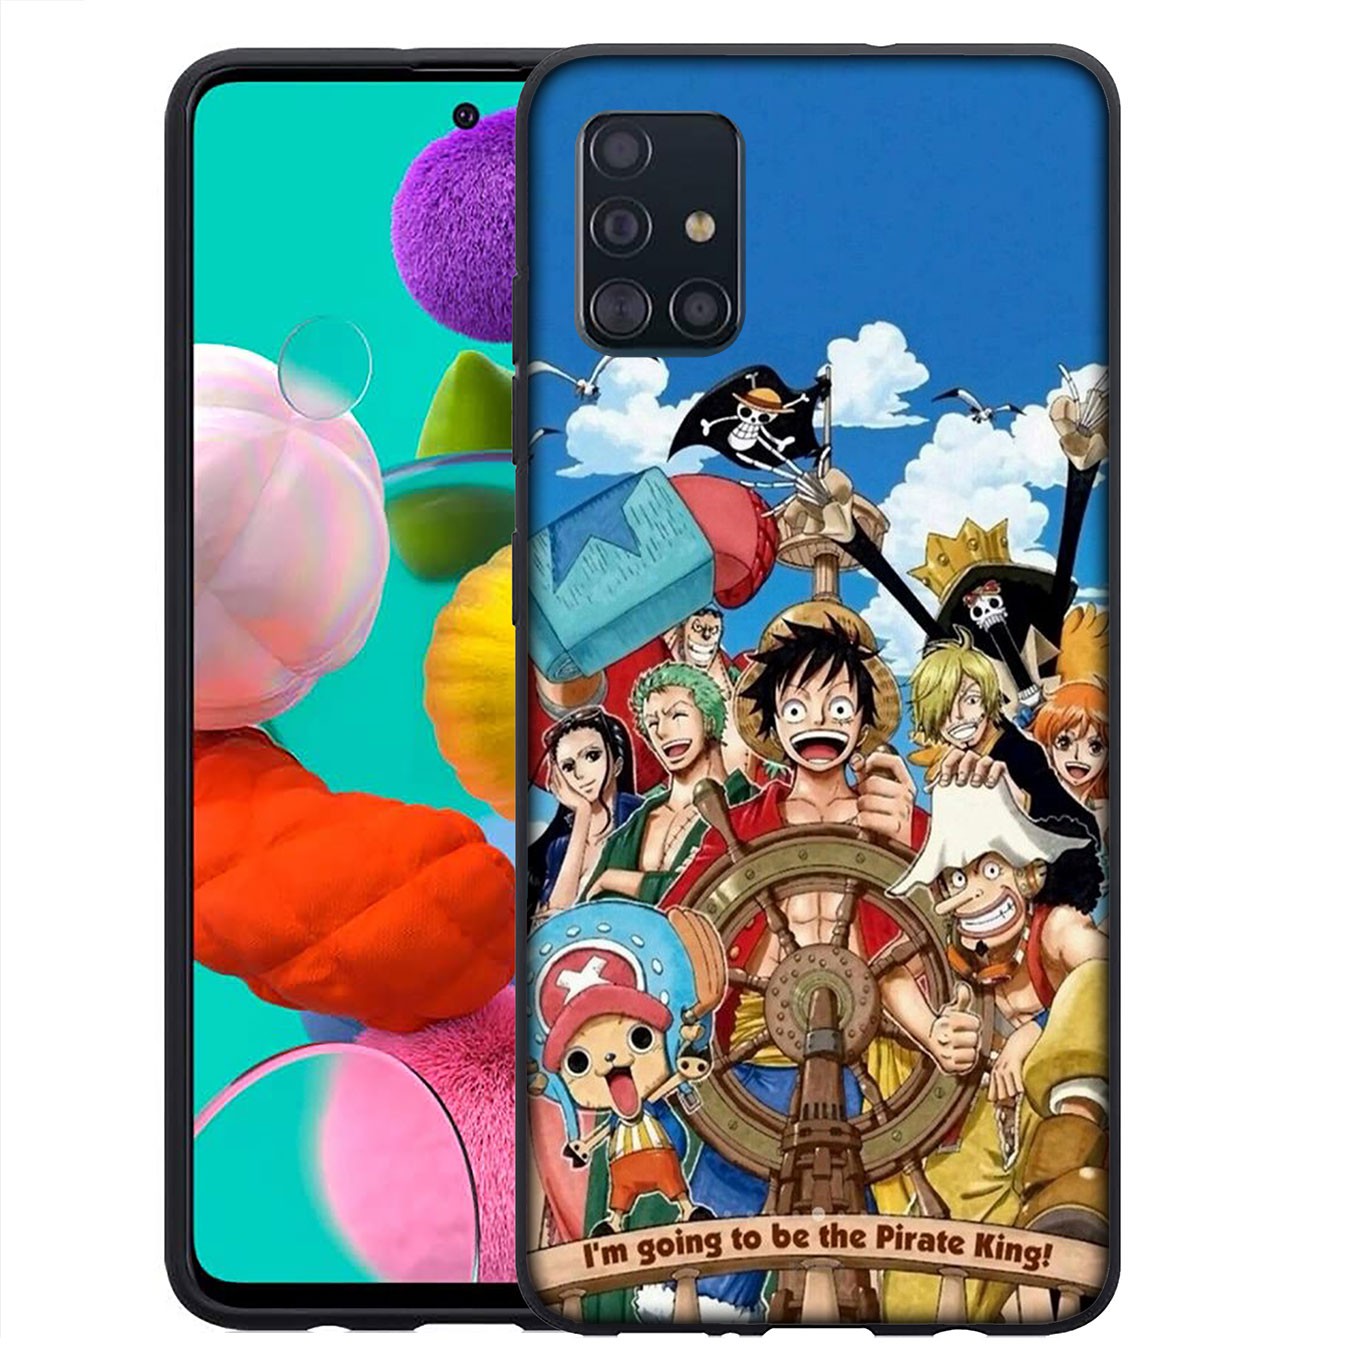 Samsung Galaxy A02S J2 J4 J5 J6 Plus J7 Prime A02 M02 j6+ A42 + Casing Soft Silicone luffy One Piece Phone Case